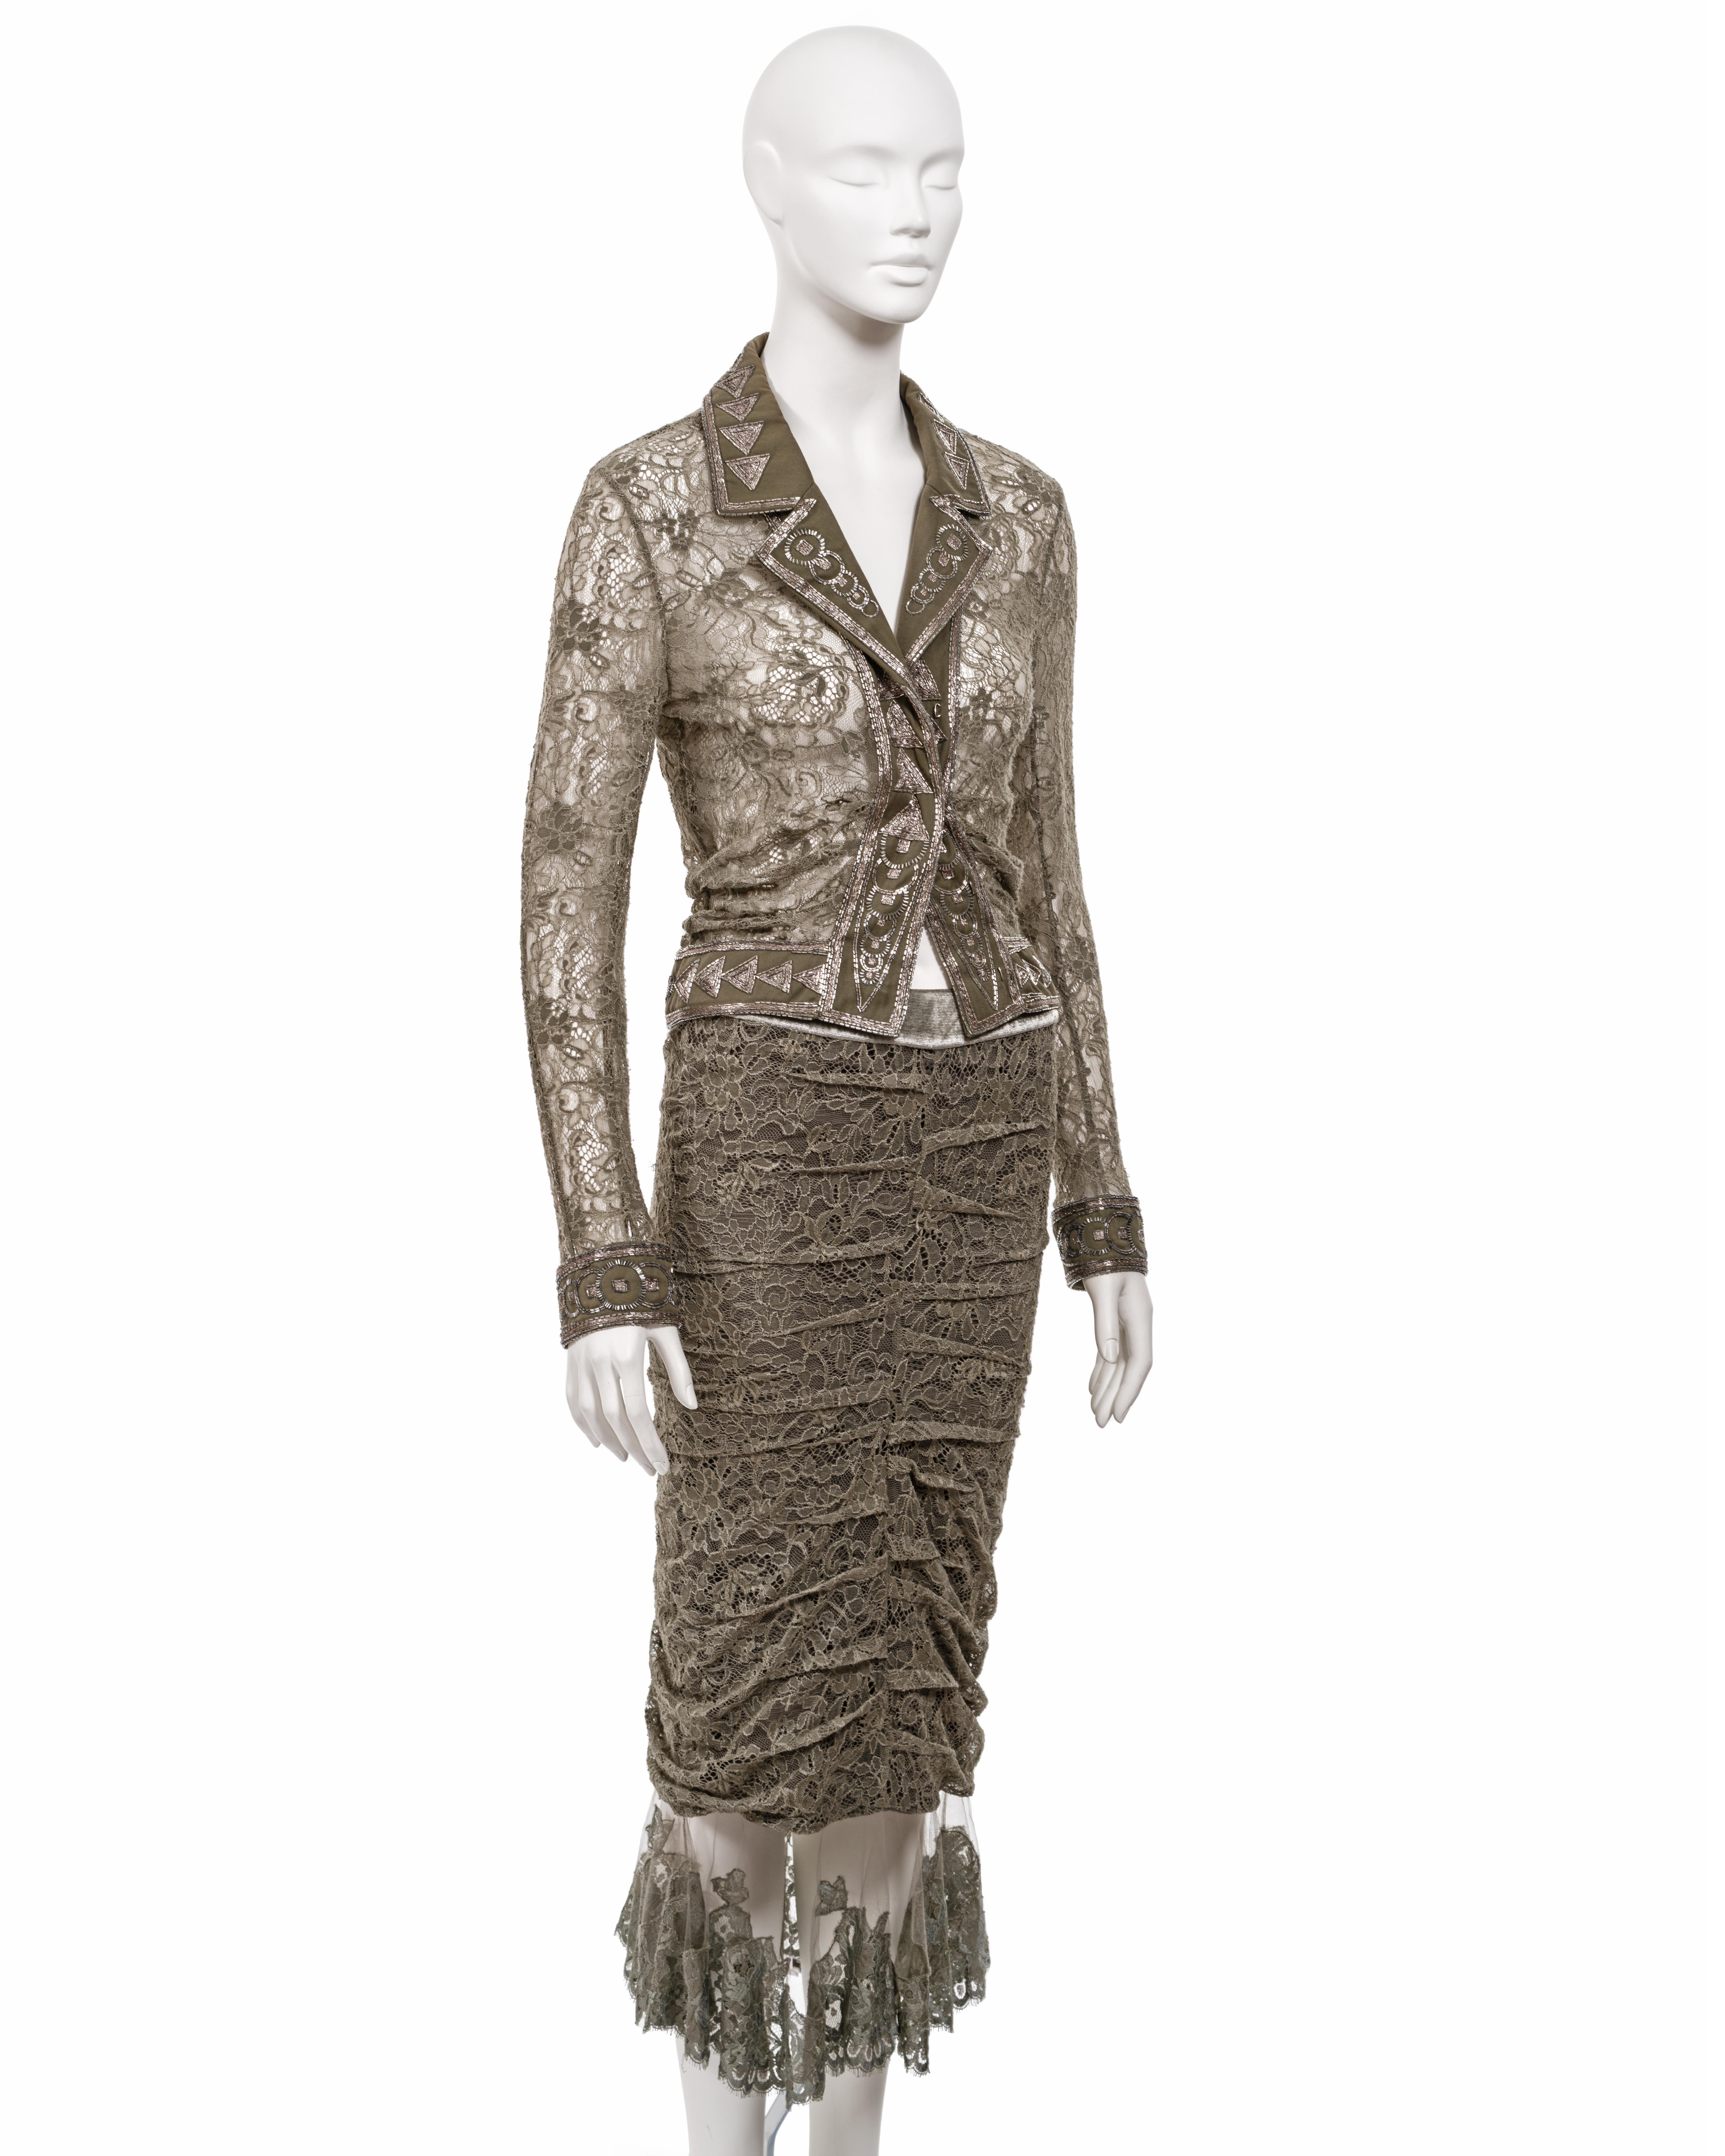 Christian Dior by John Galliano green lace beaded skirt suit, fw 2003 For Sale 7